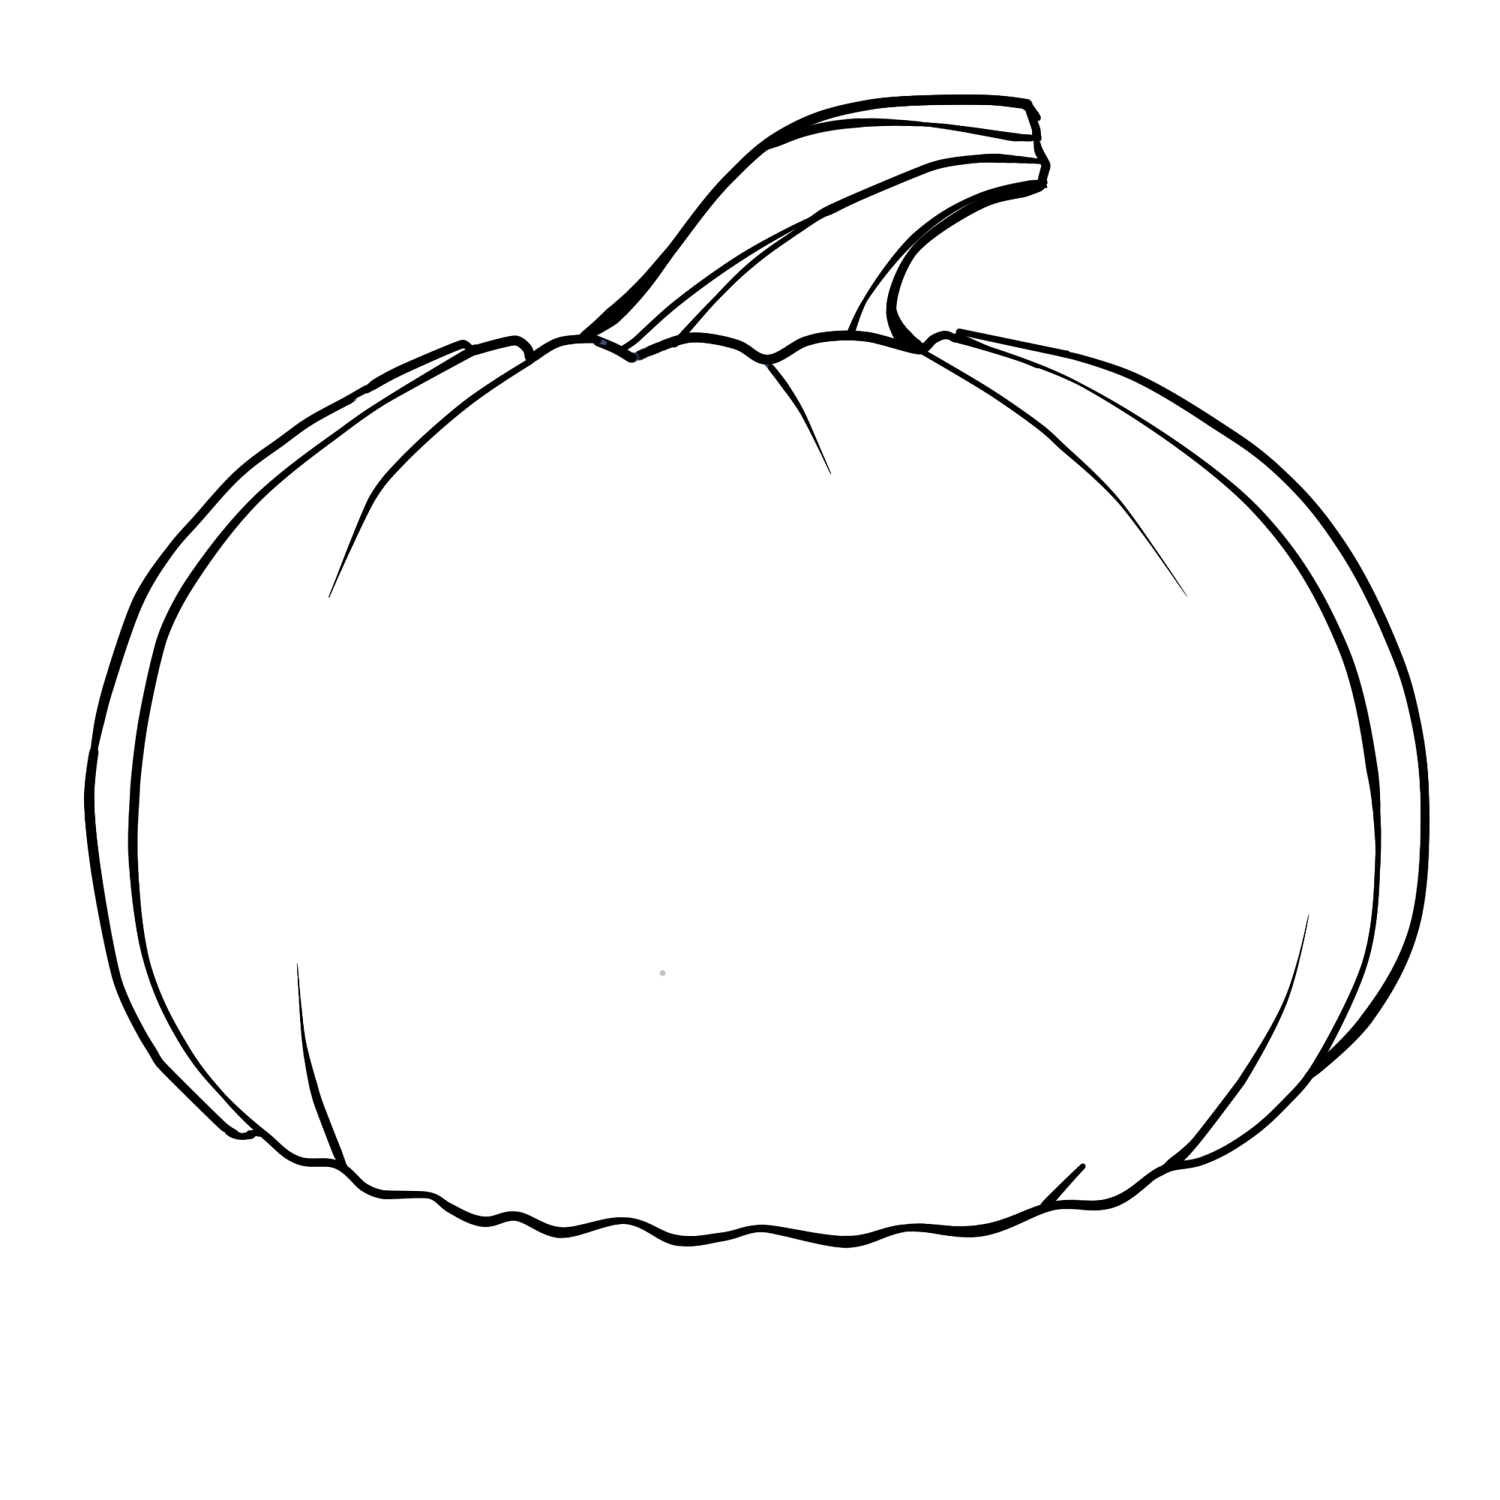 drawing-pumpkin-166819-objects-printable-coloring-pages